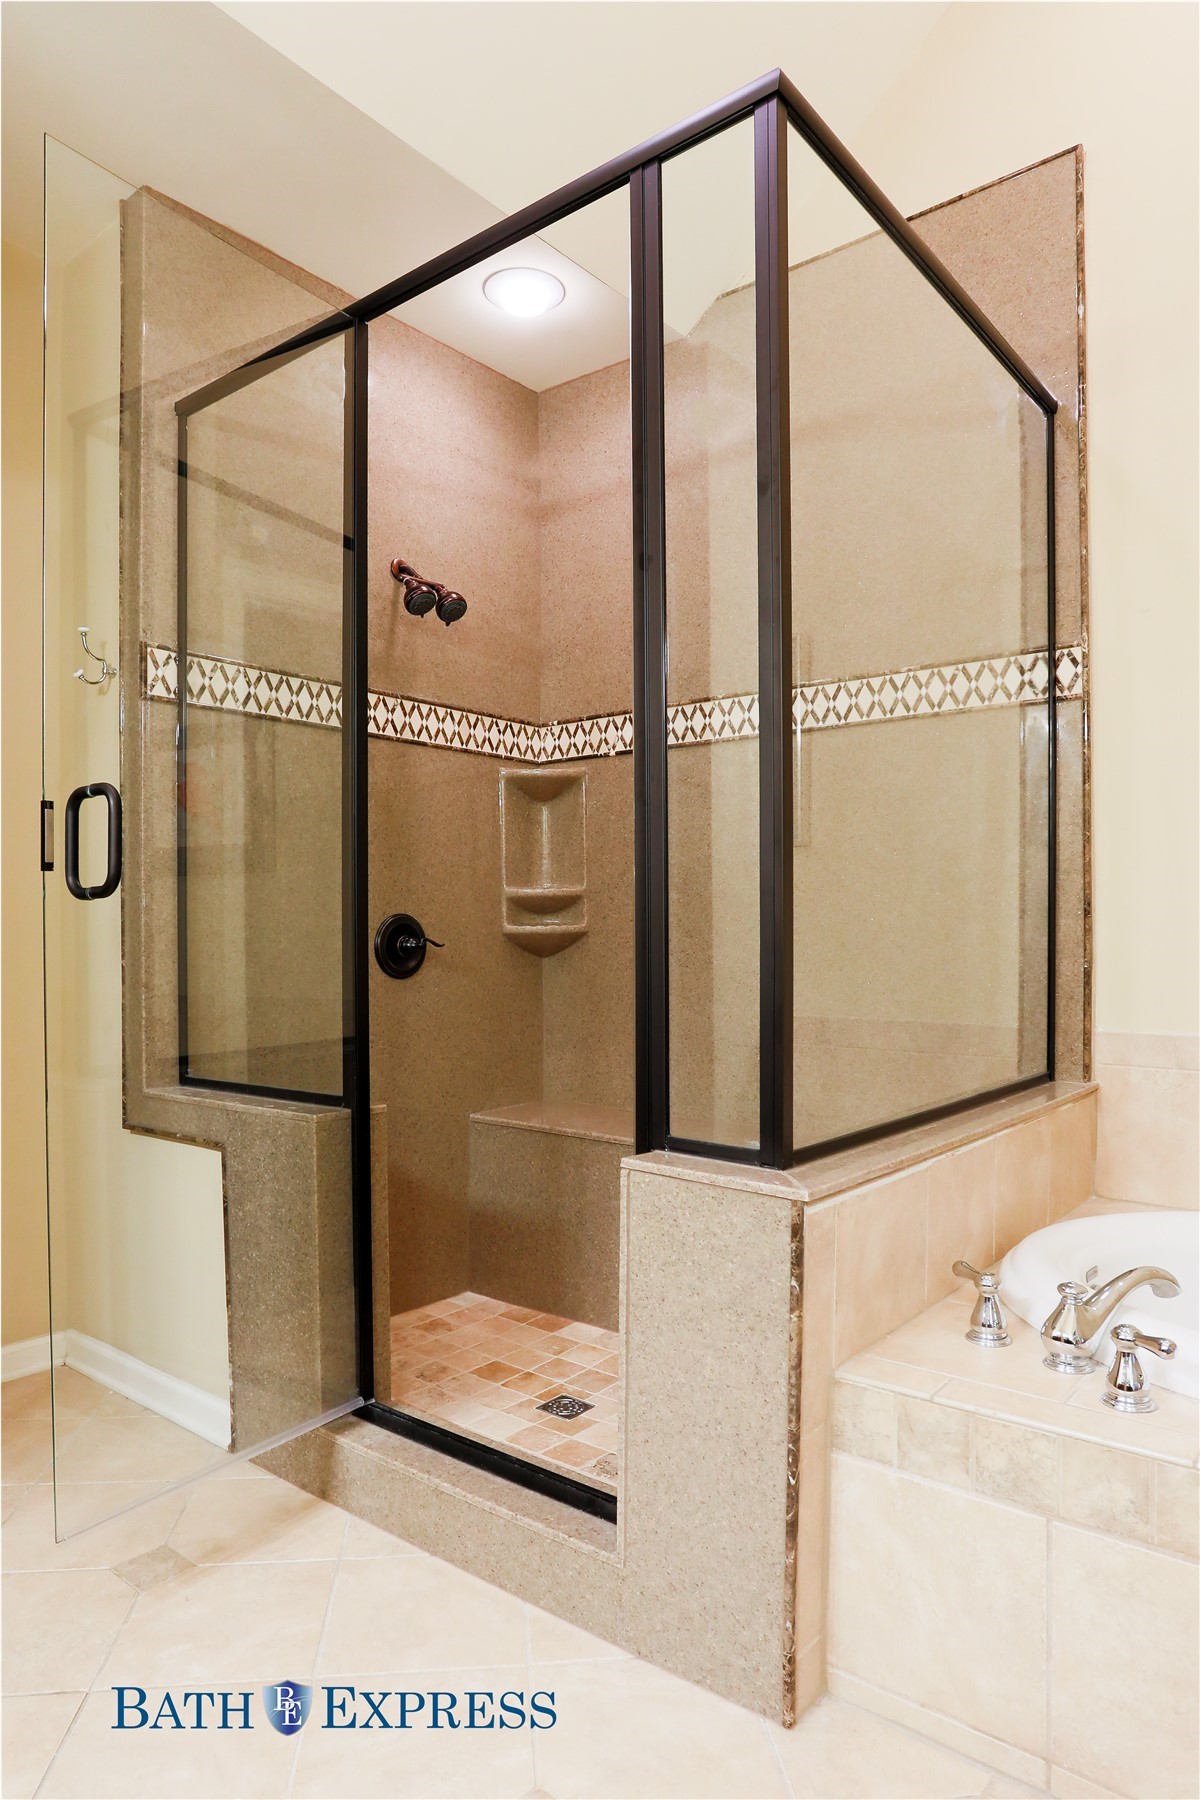 What to Expect During Your Bathroom Remodel